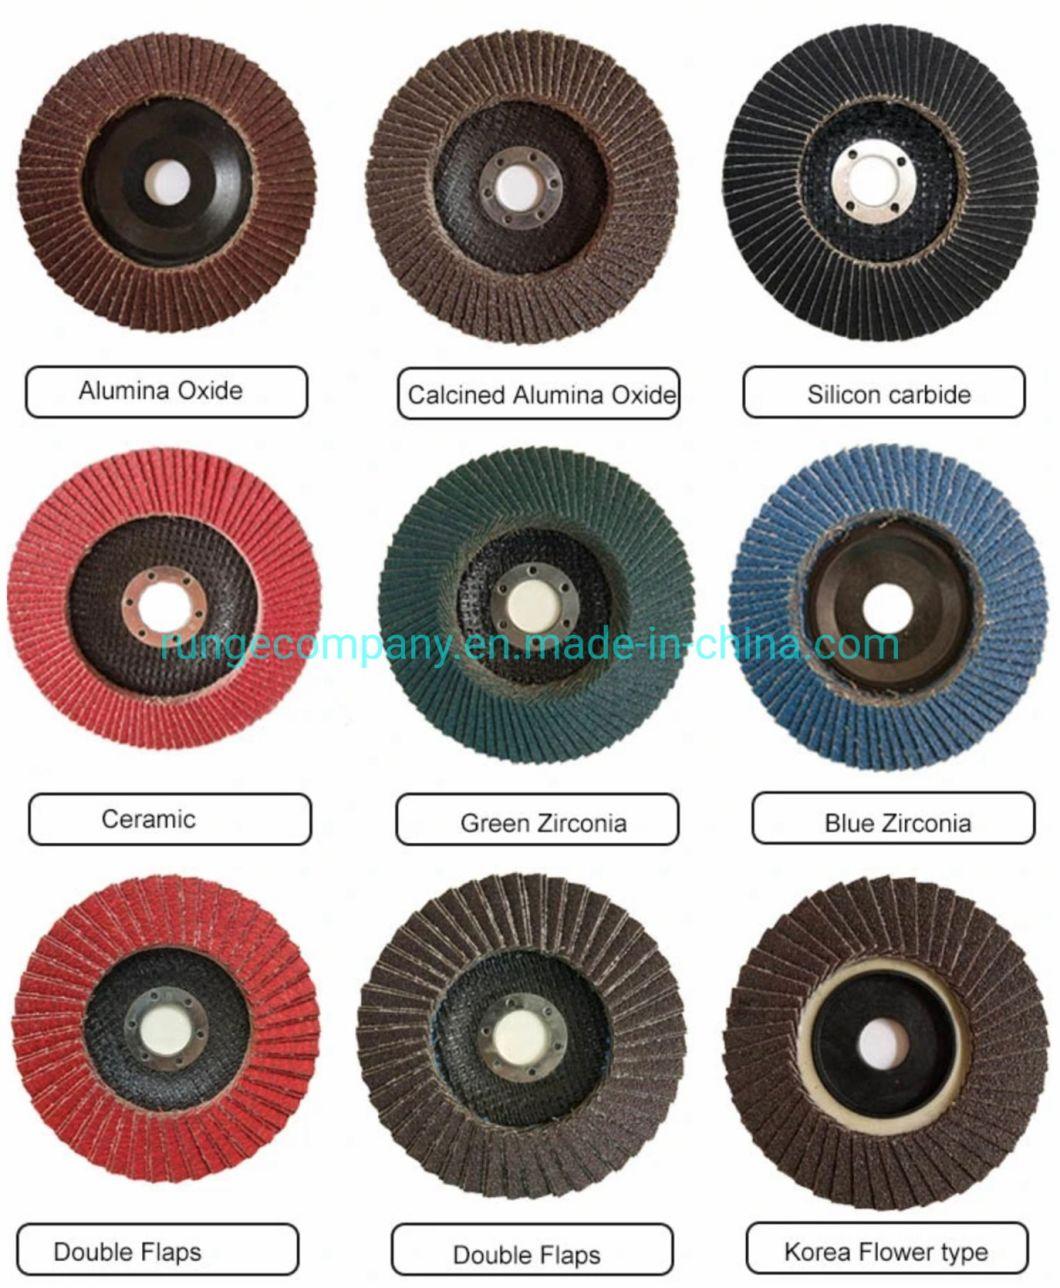 Power Electric Tools Parts 4-1/2 X 7/8 Inch T29 Zirconia Abrasive Grinding Wheel Flap Disc 40/60/80/120 Grits